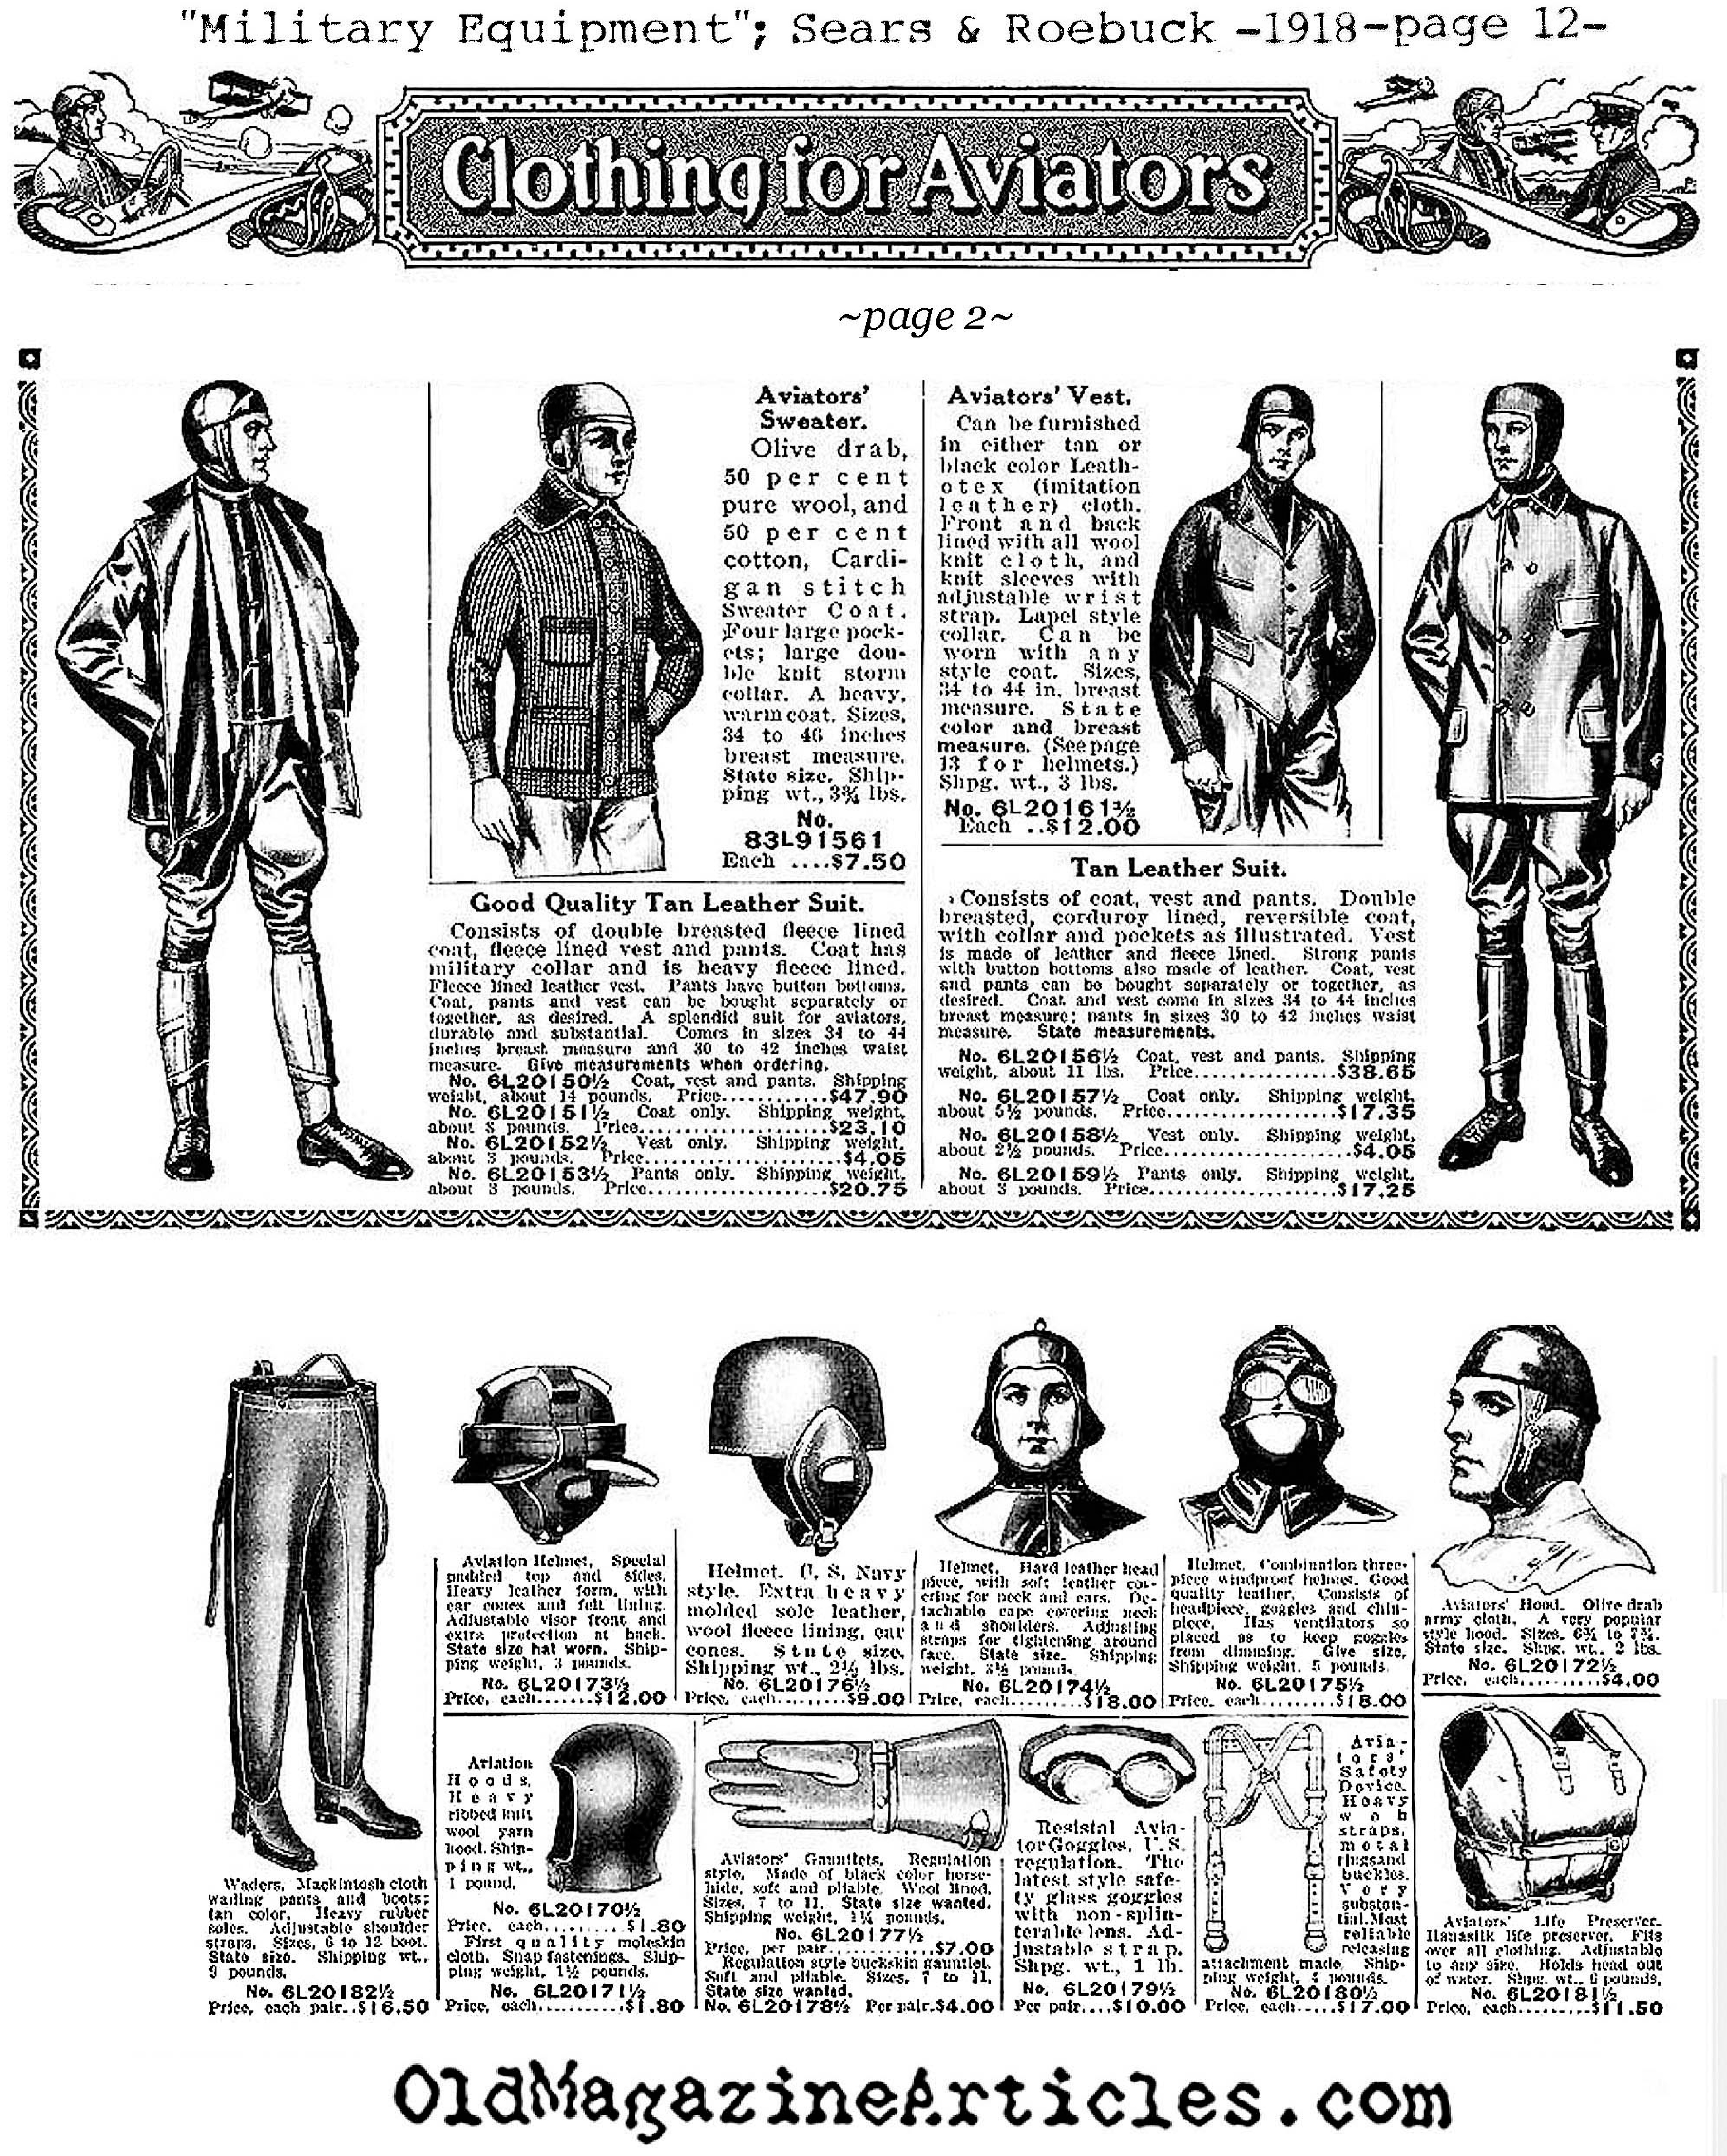 Clothing for Aviators (Sears and Roebuck, 1918)